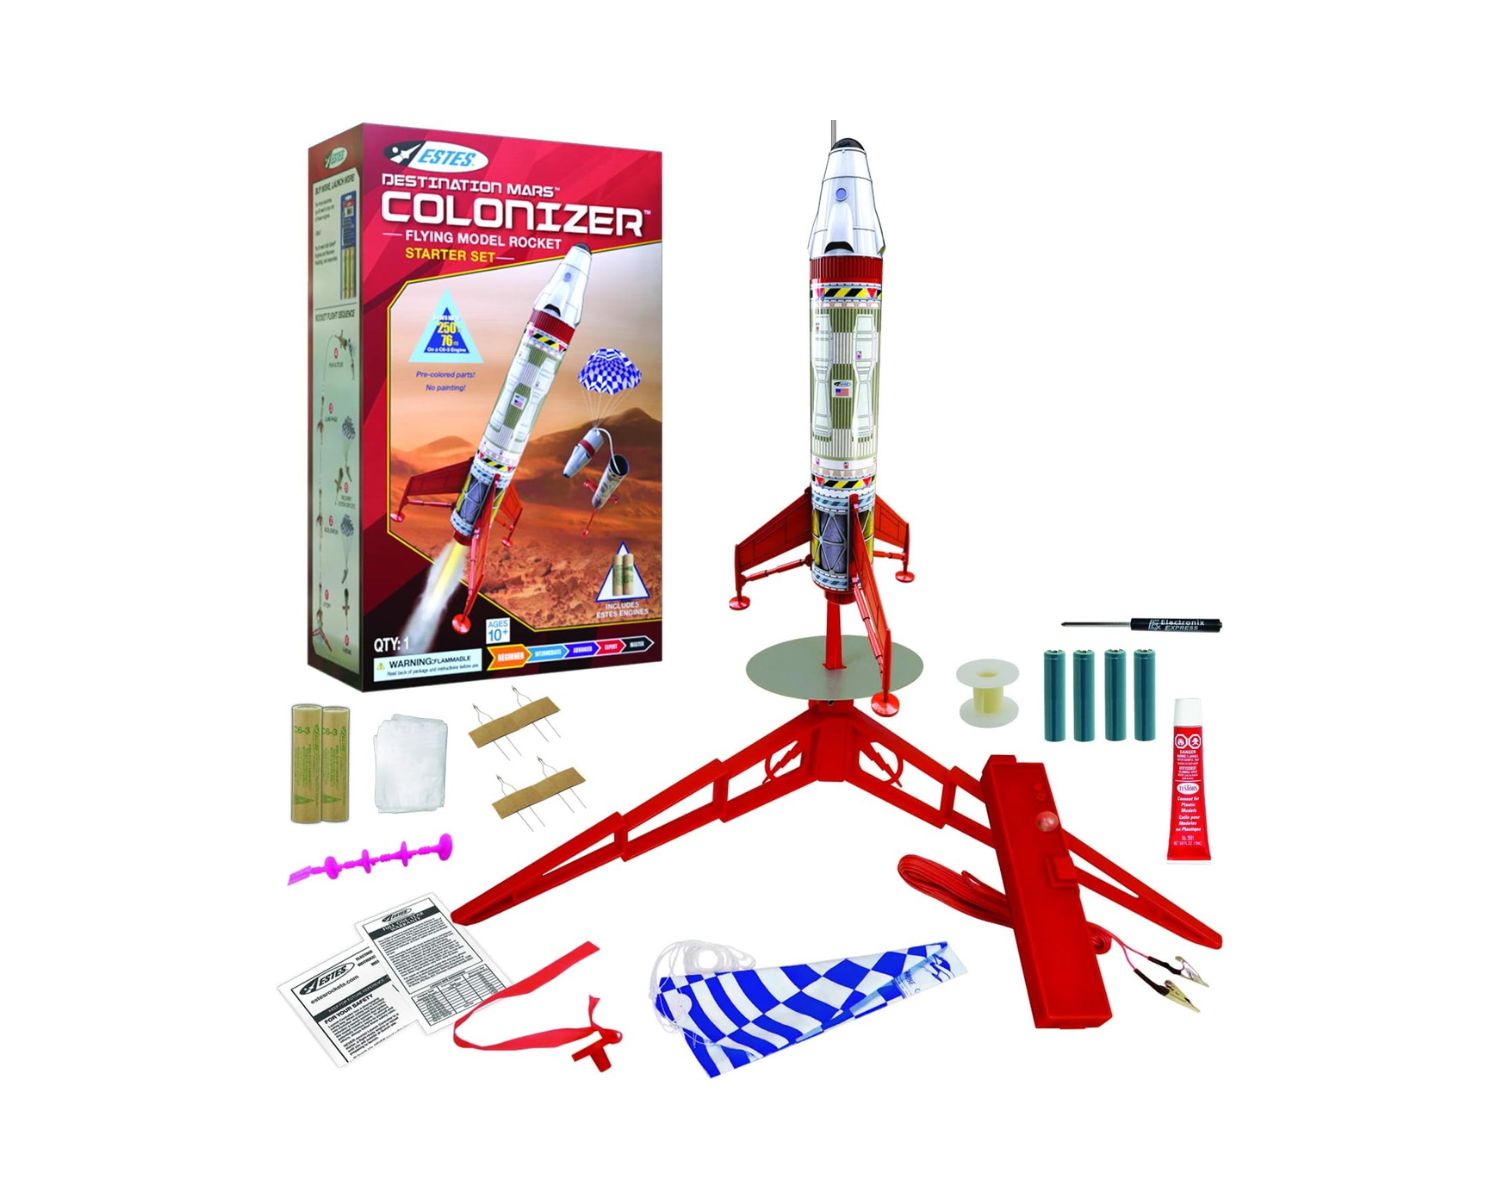 Model Rocket Kit Review: Unbiased Analysis and Recommendations